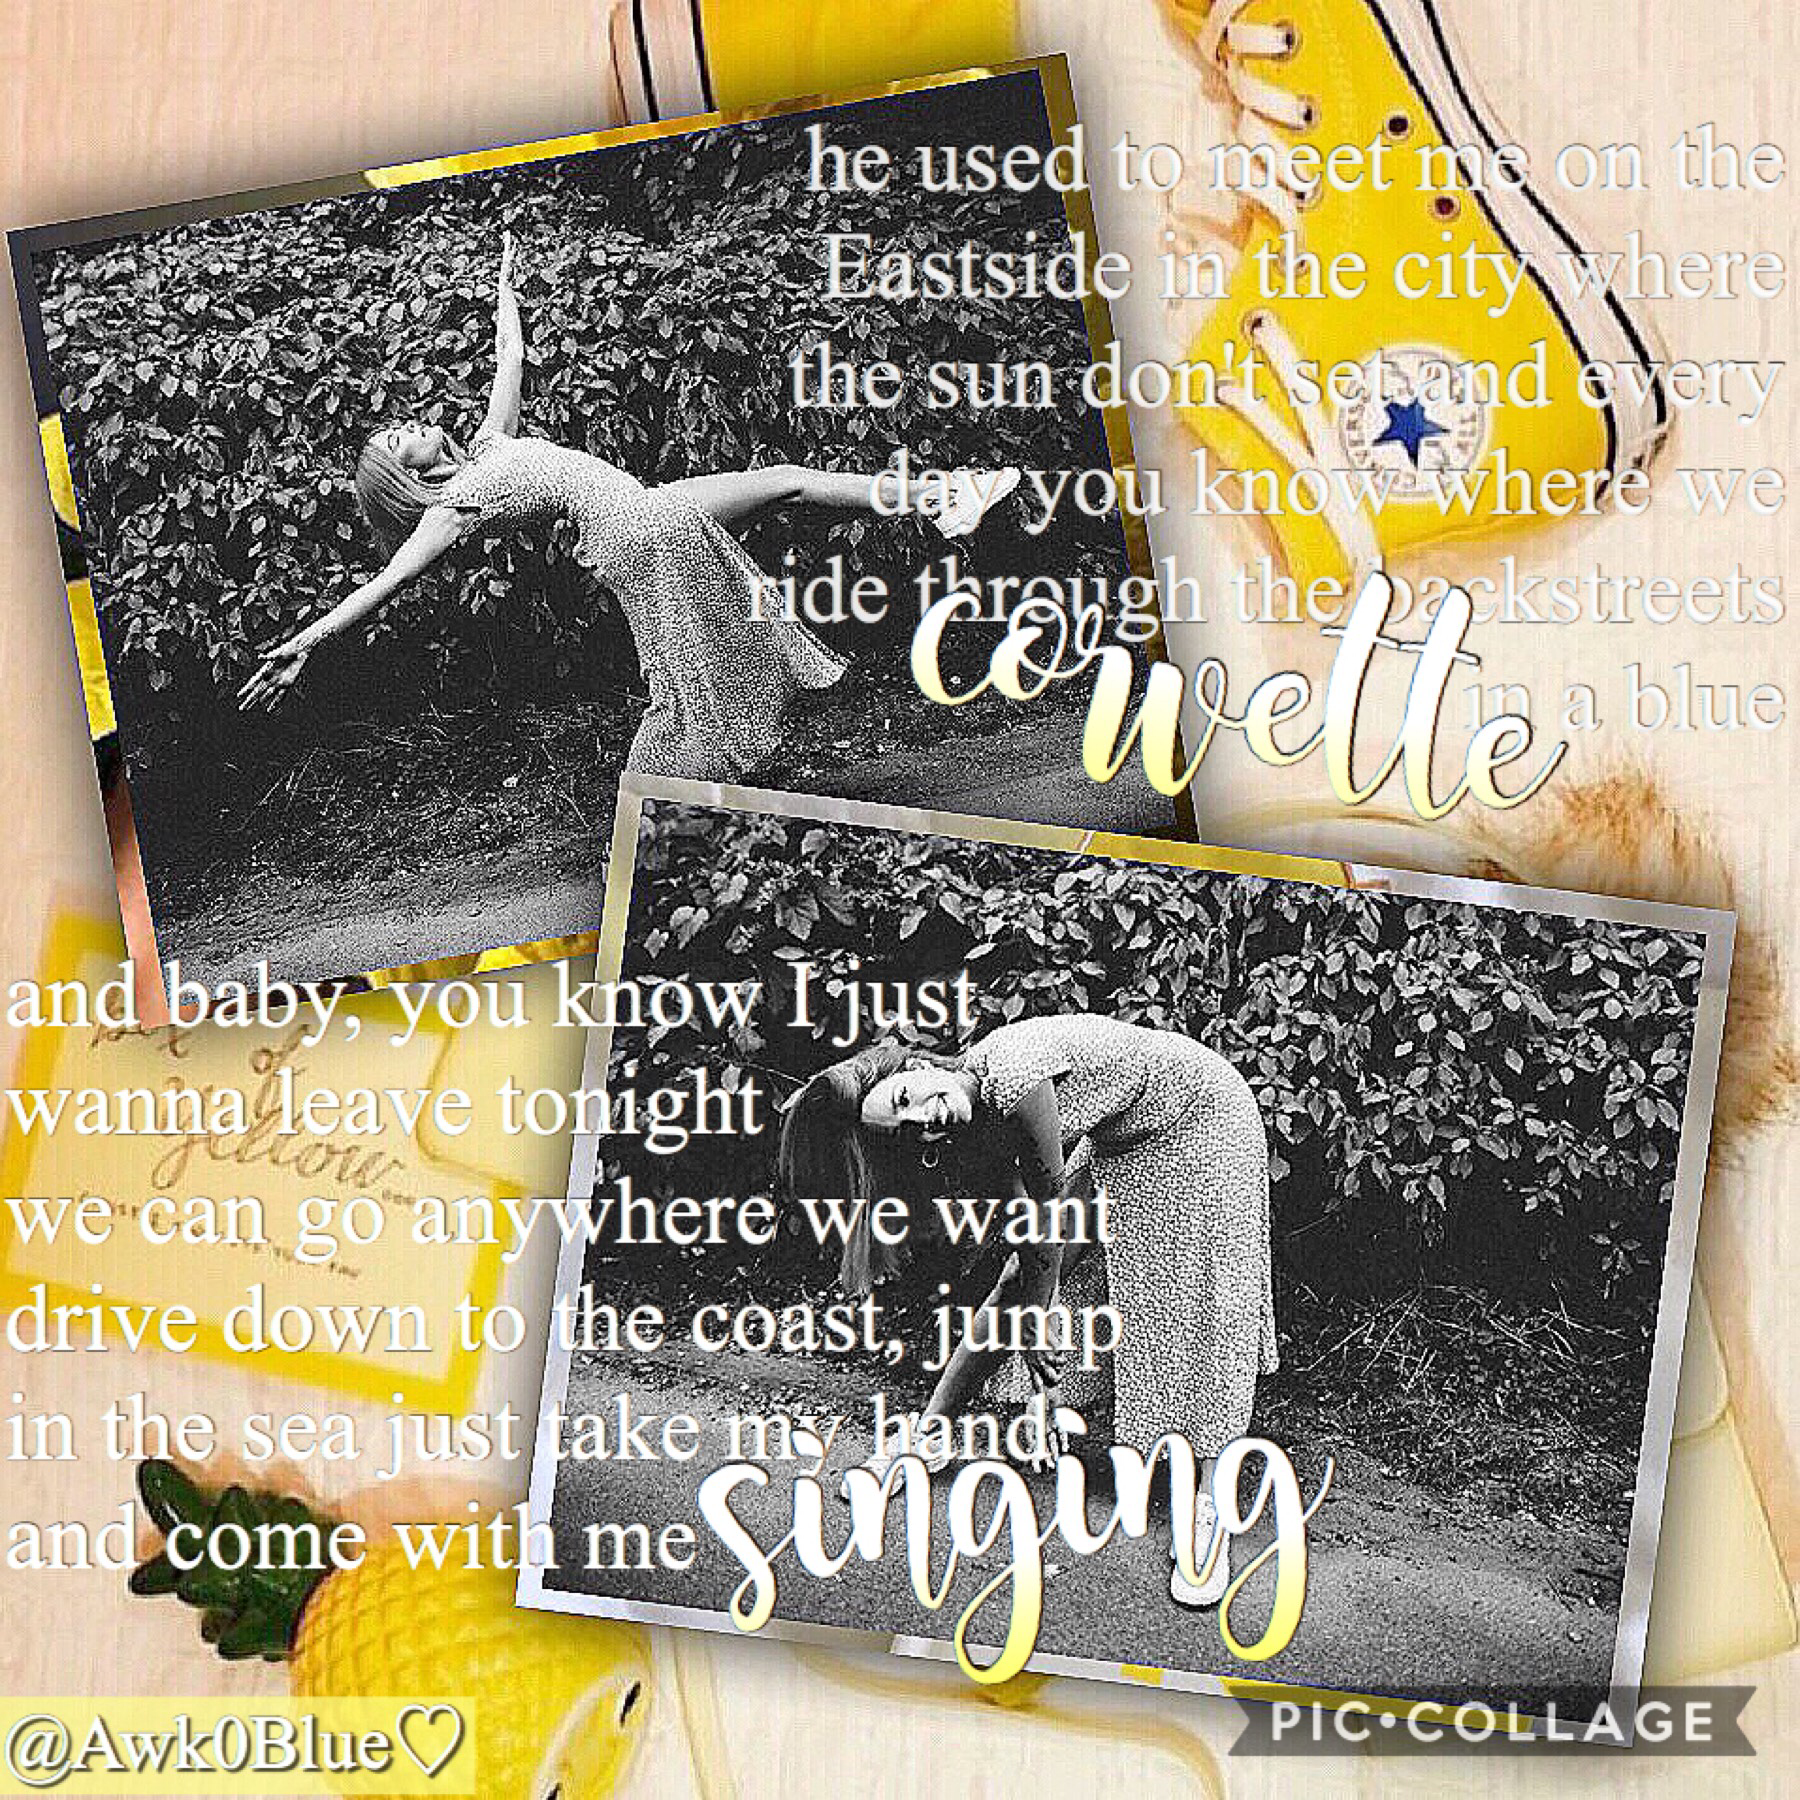 💛 T A P 💛

Contest entry for @obsessivetbh 
Go follow her as her collages are actually amazing👌